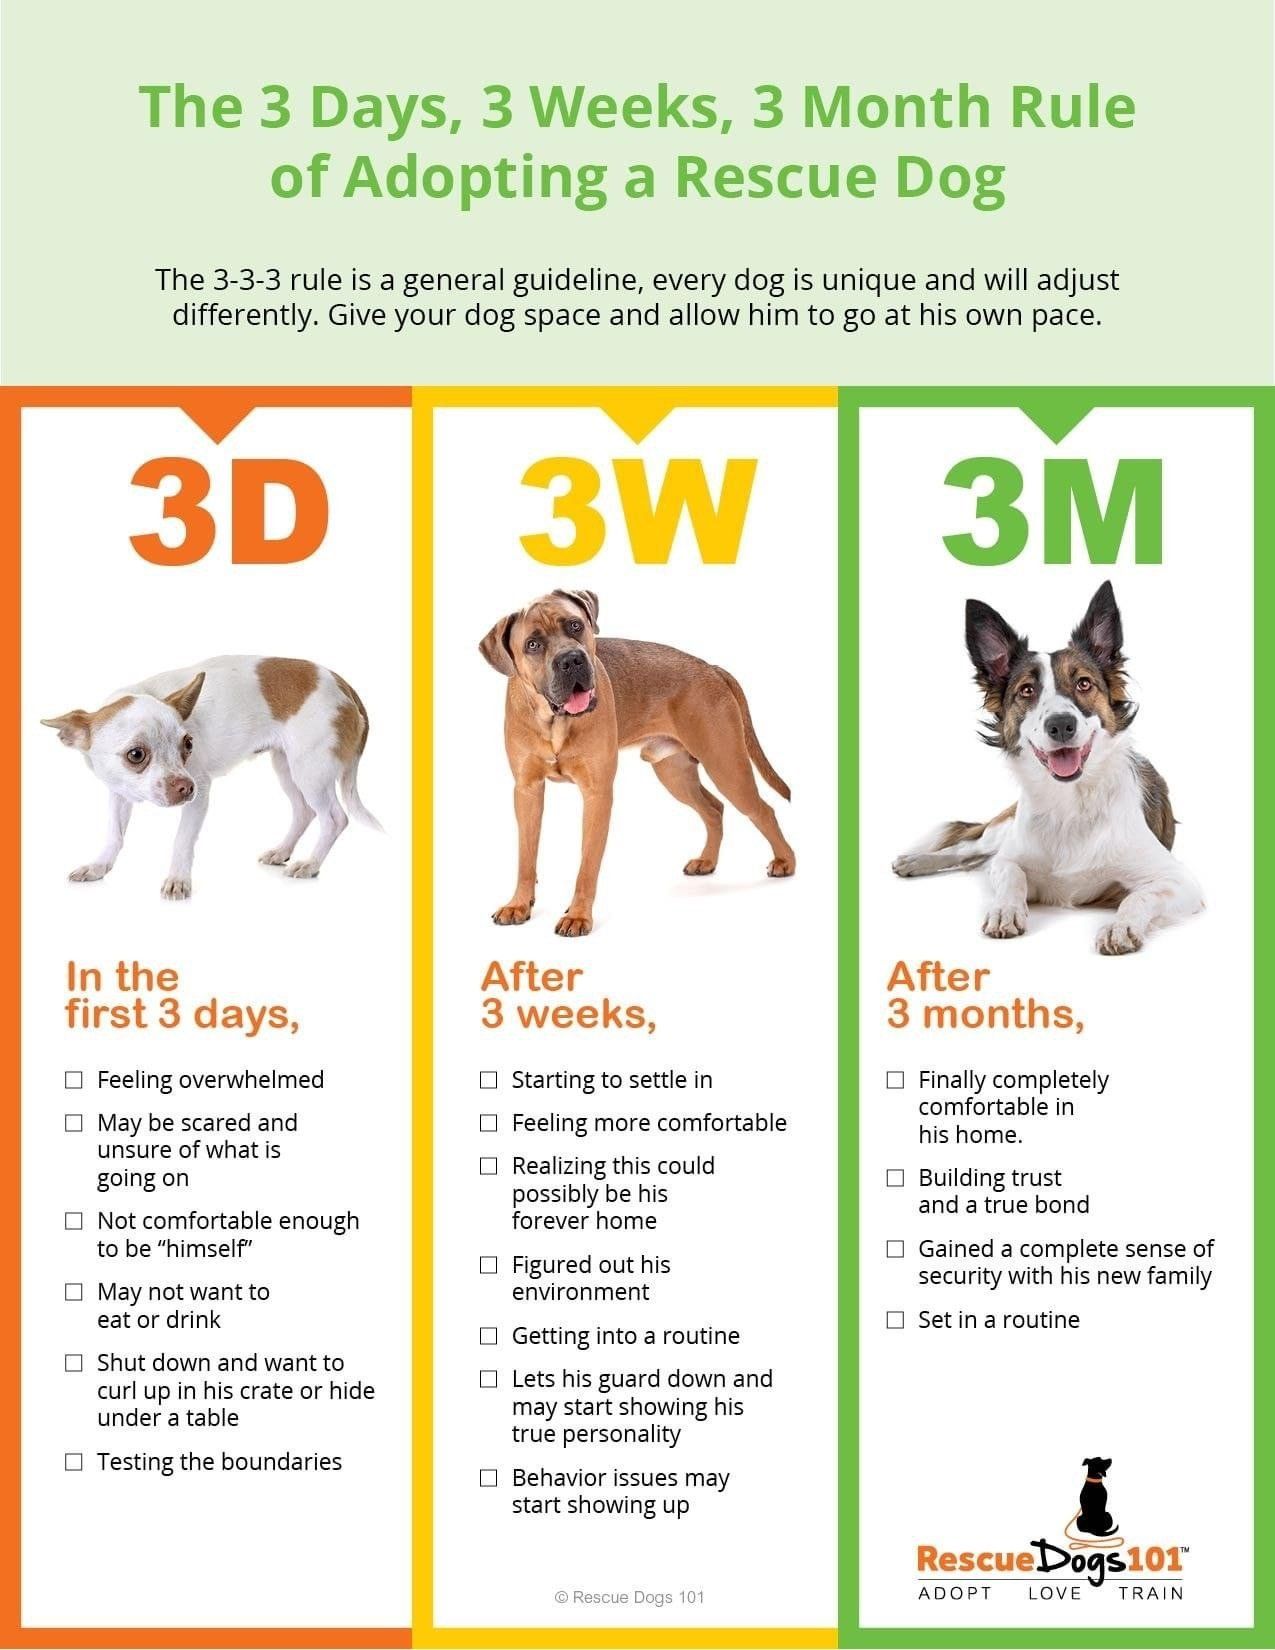 The 3-3-3 rule of a rescue dog